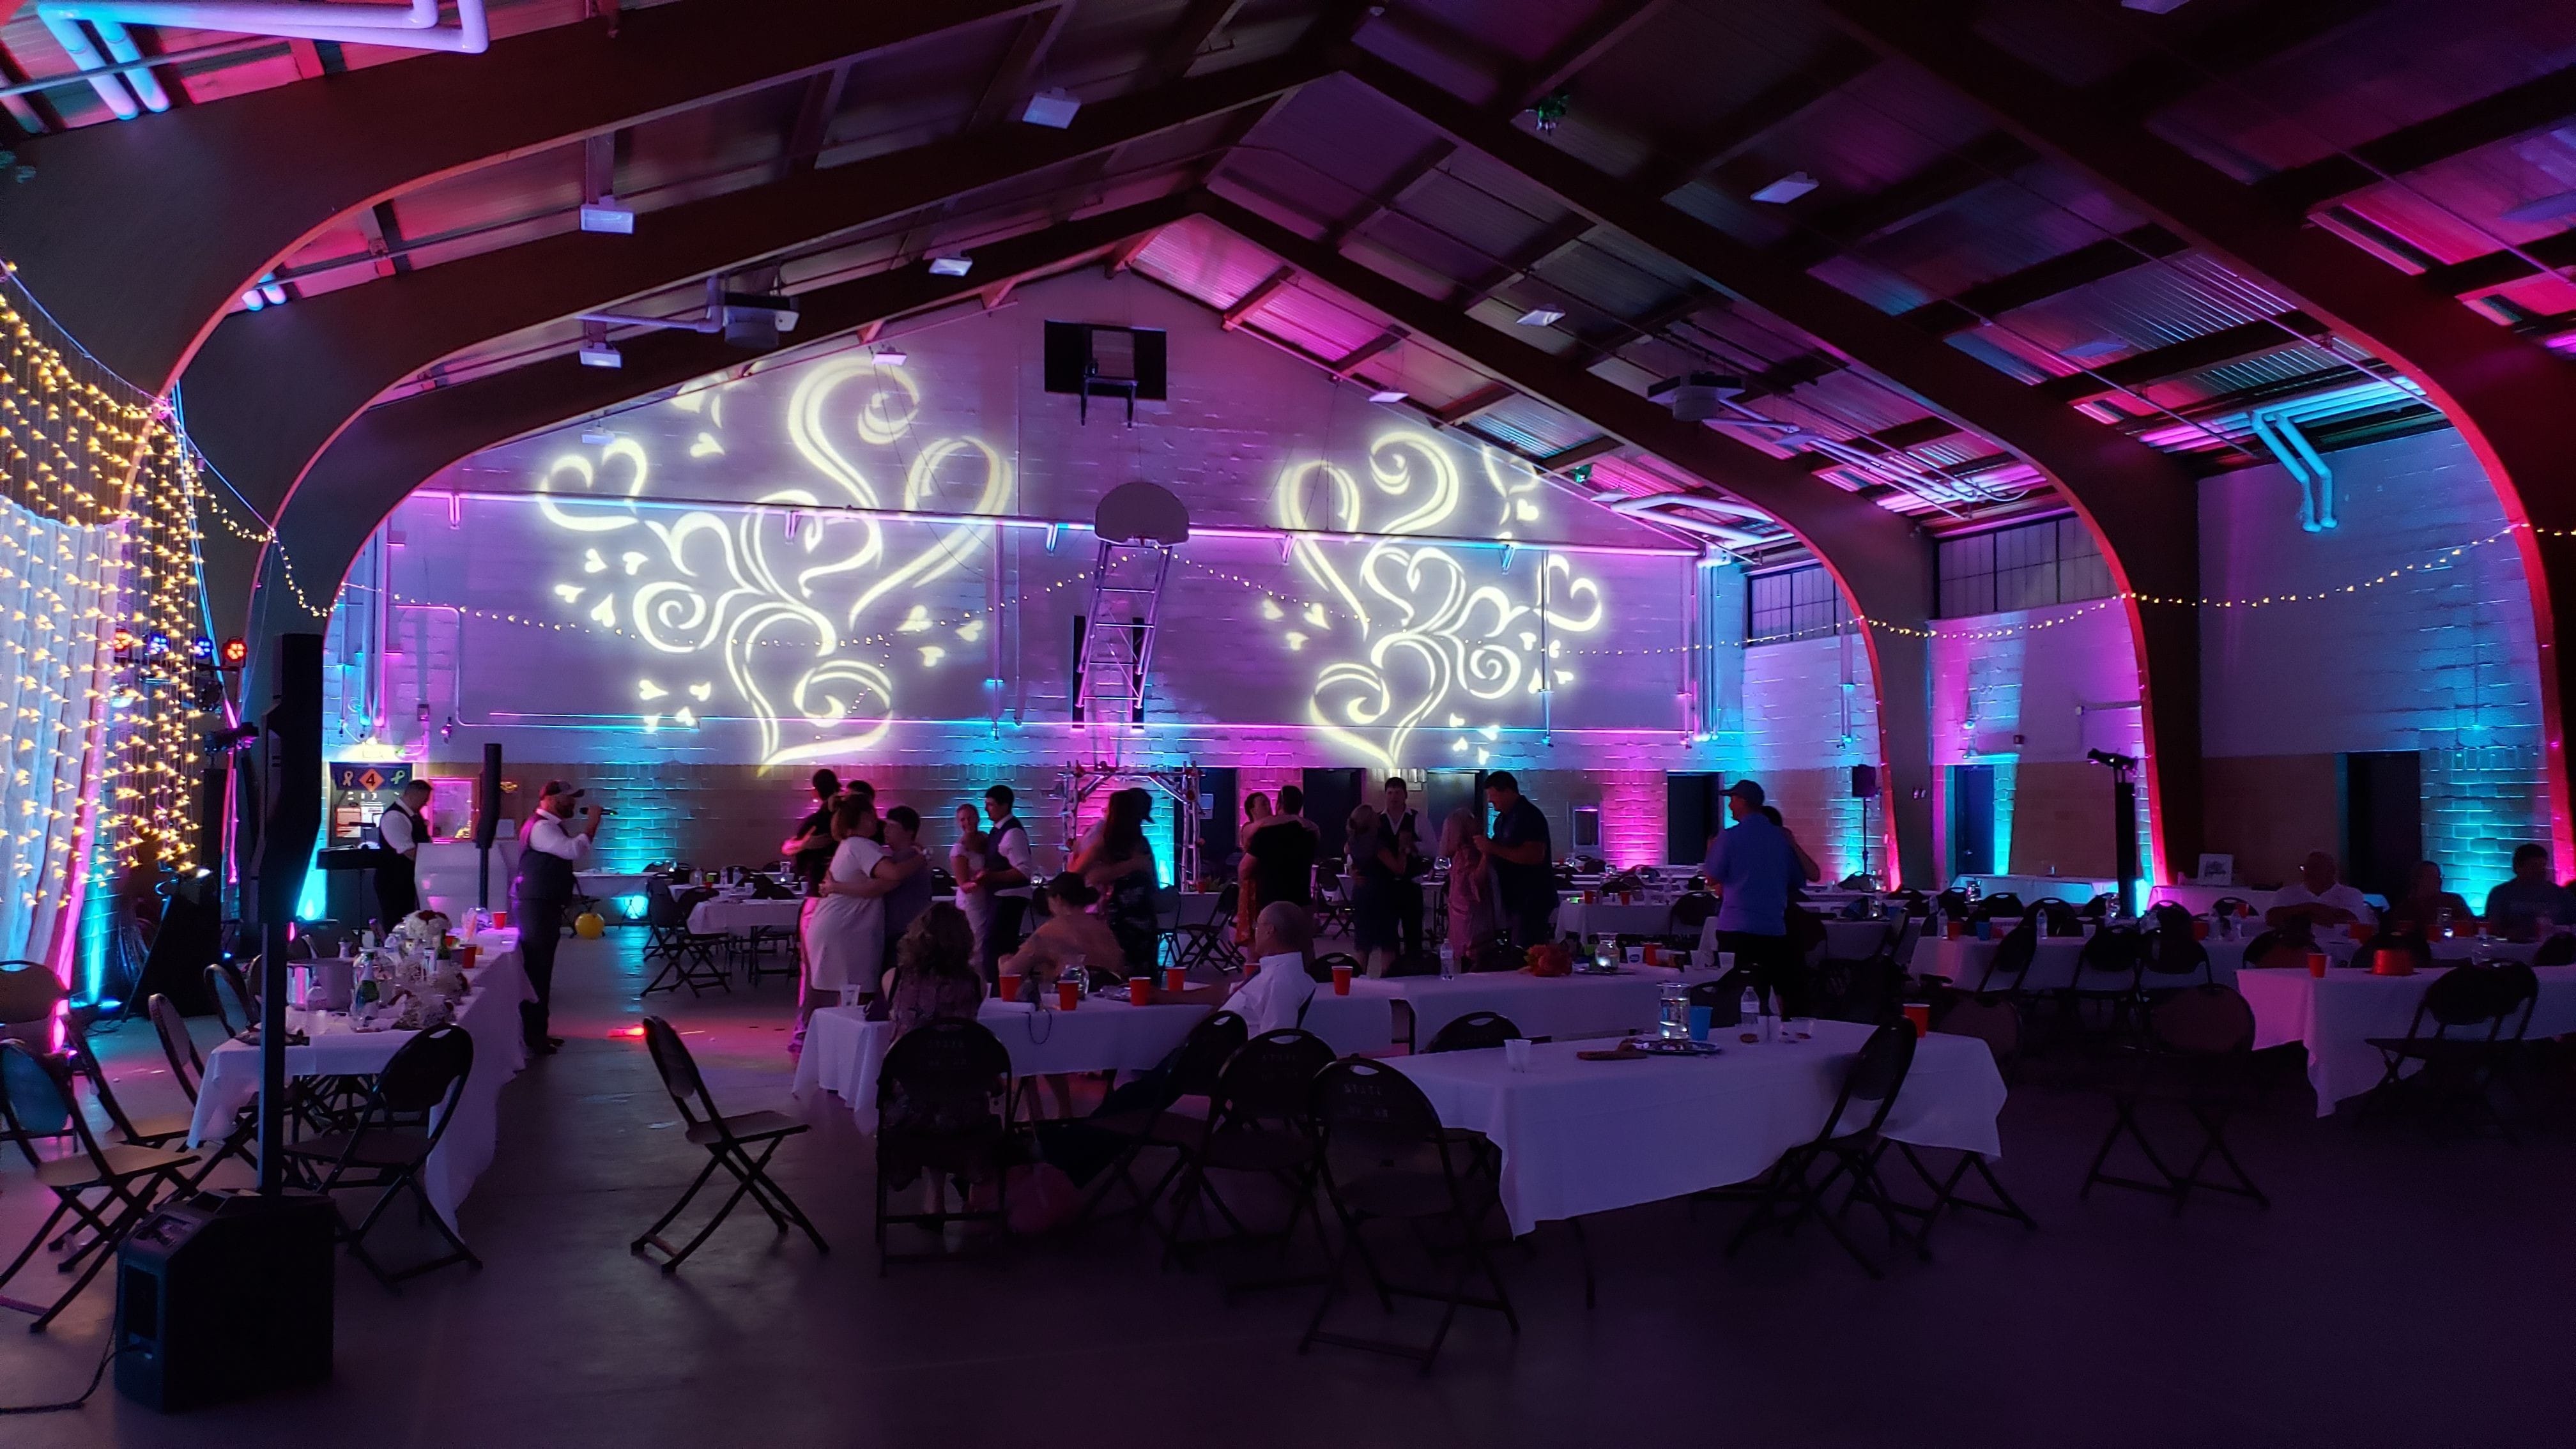 Wedding lighting at the Cloquet Armory by Duluth Event Lighting. Up lighting in blue, teal and magenta with fun heart gobos on the walls.